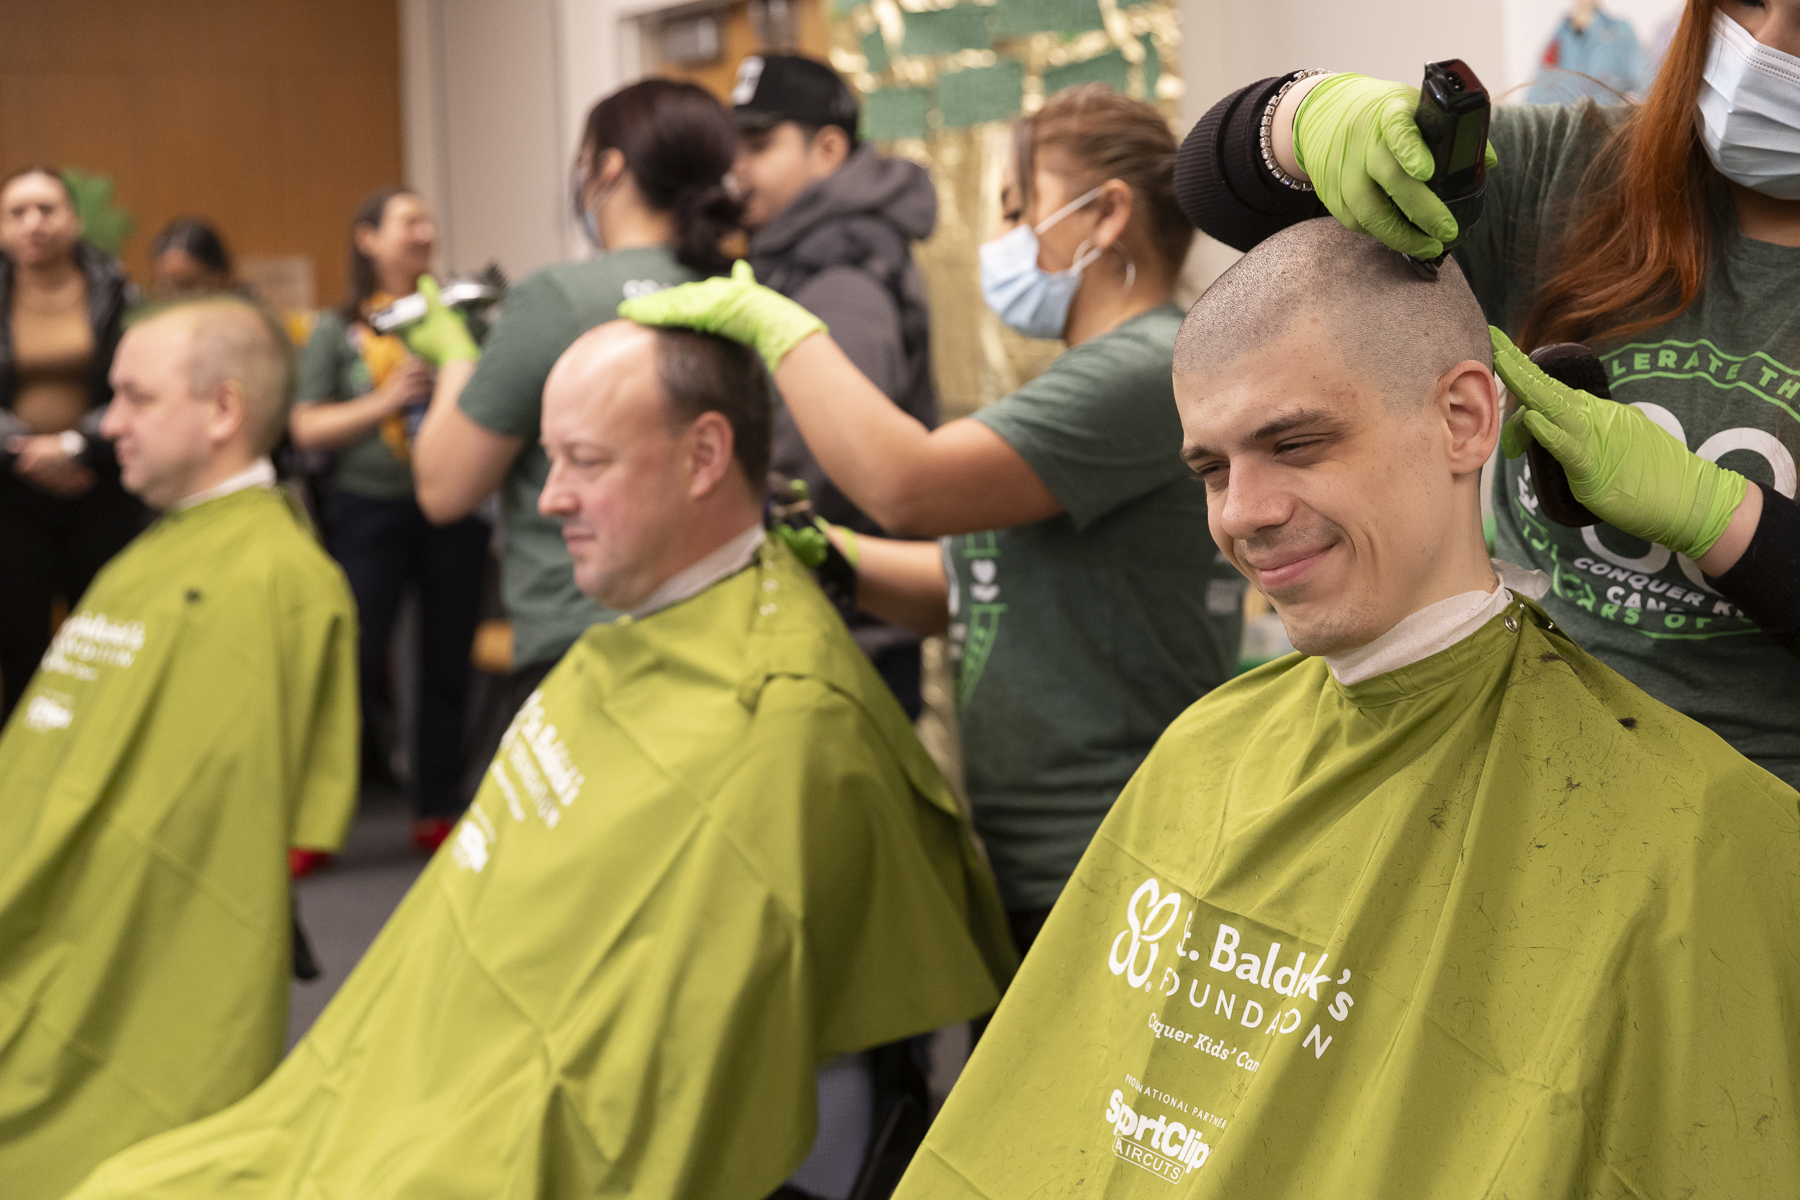 Amid the sounds of trimmers and cheers, thirteen people volunteered to have their heads shaved Feb. 23, 2024, to raise money for St. Baldrick's Foundation to help fund pediatric cancer research. (Jenny Fontaine / UIC)